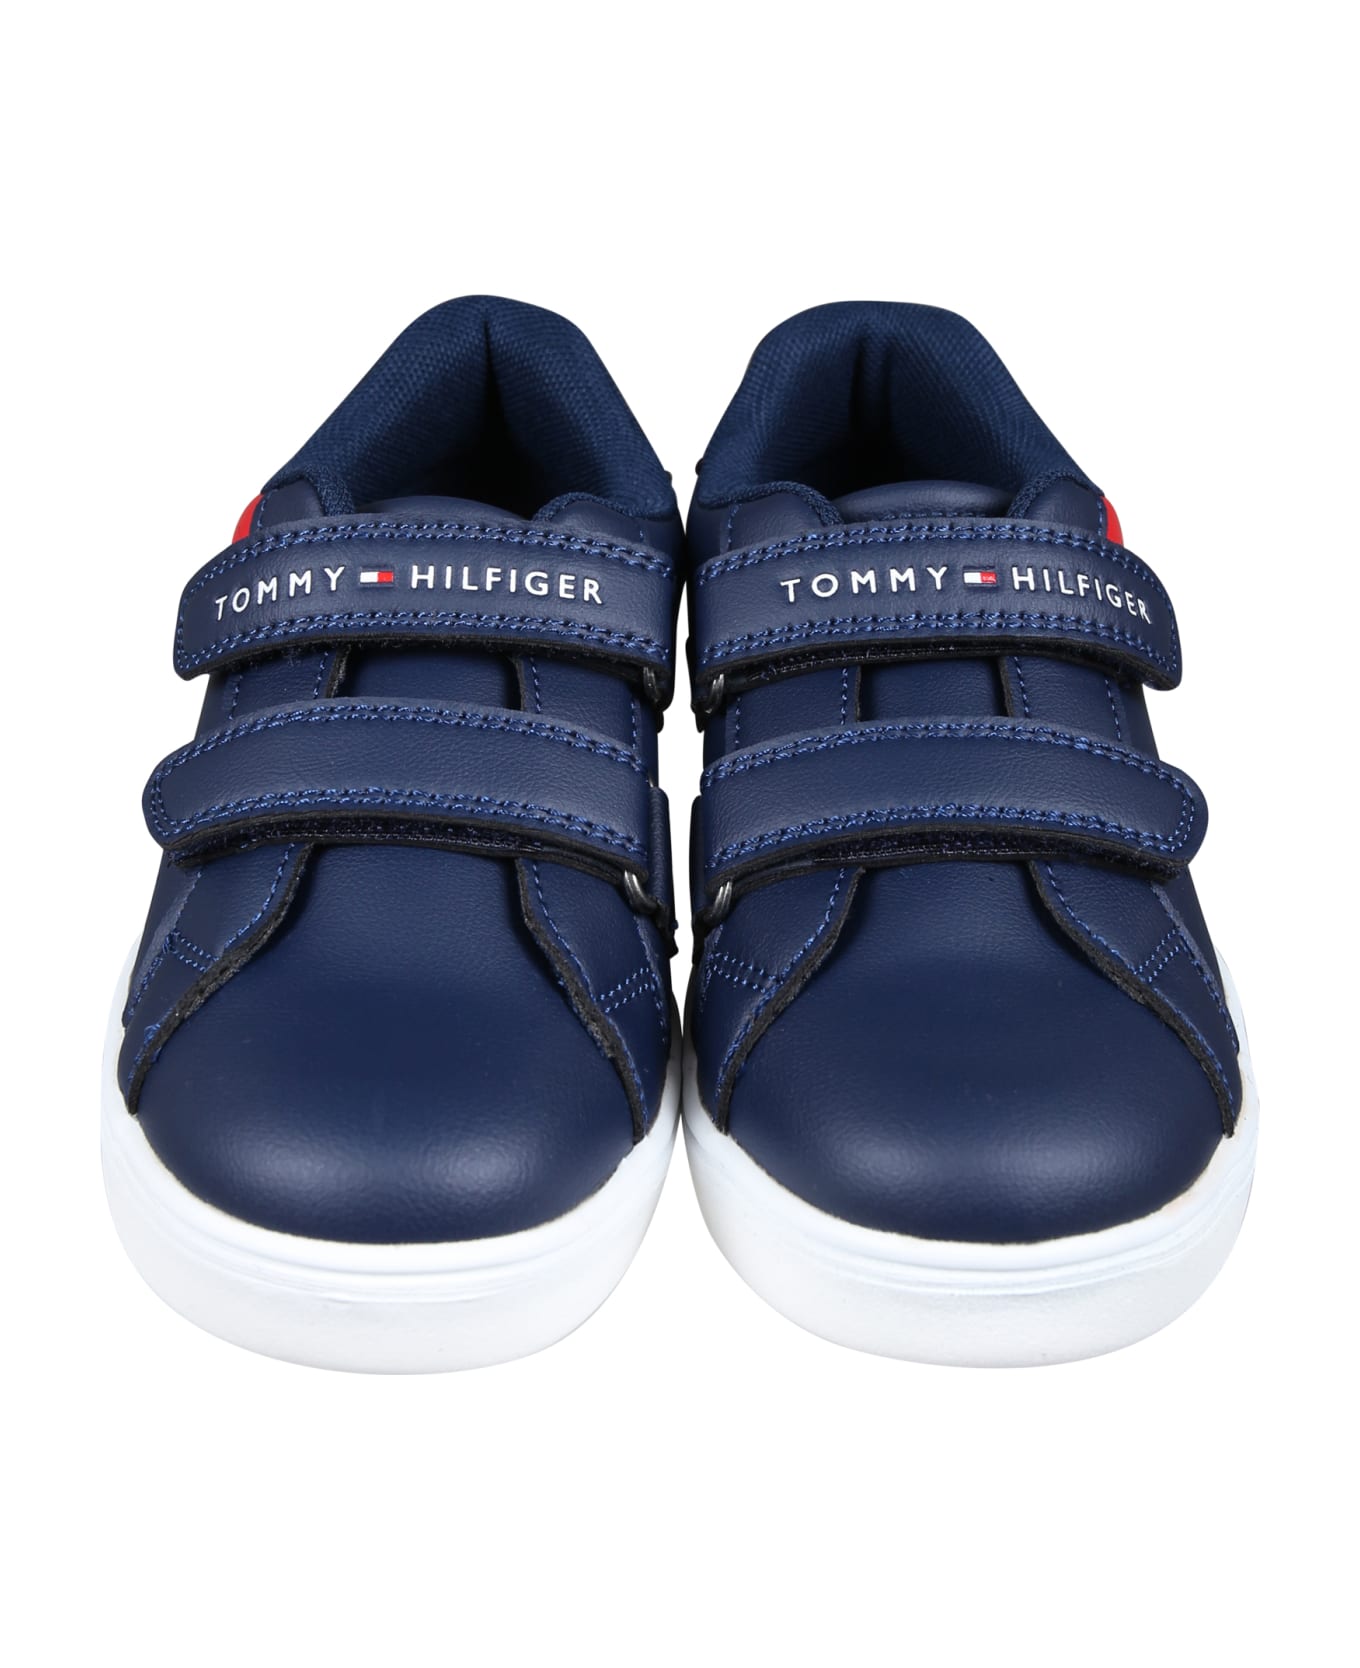 Tommy Hilfiger Blue Sneakers For Kids With Flag And Logo - Blue シューズ